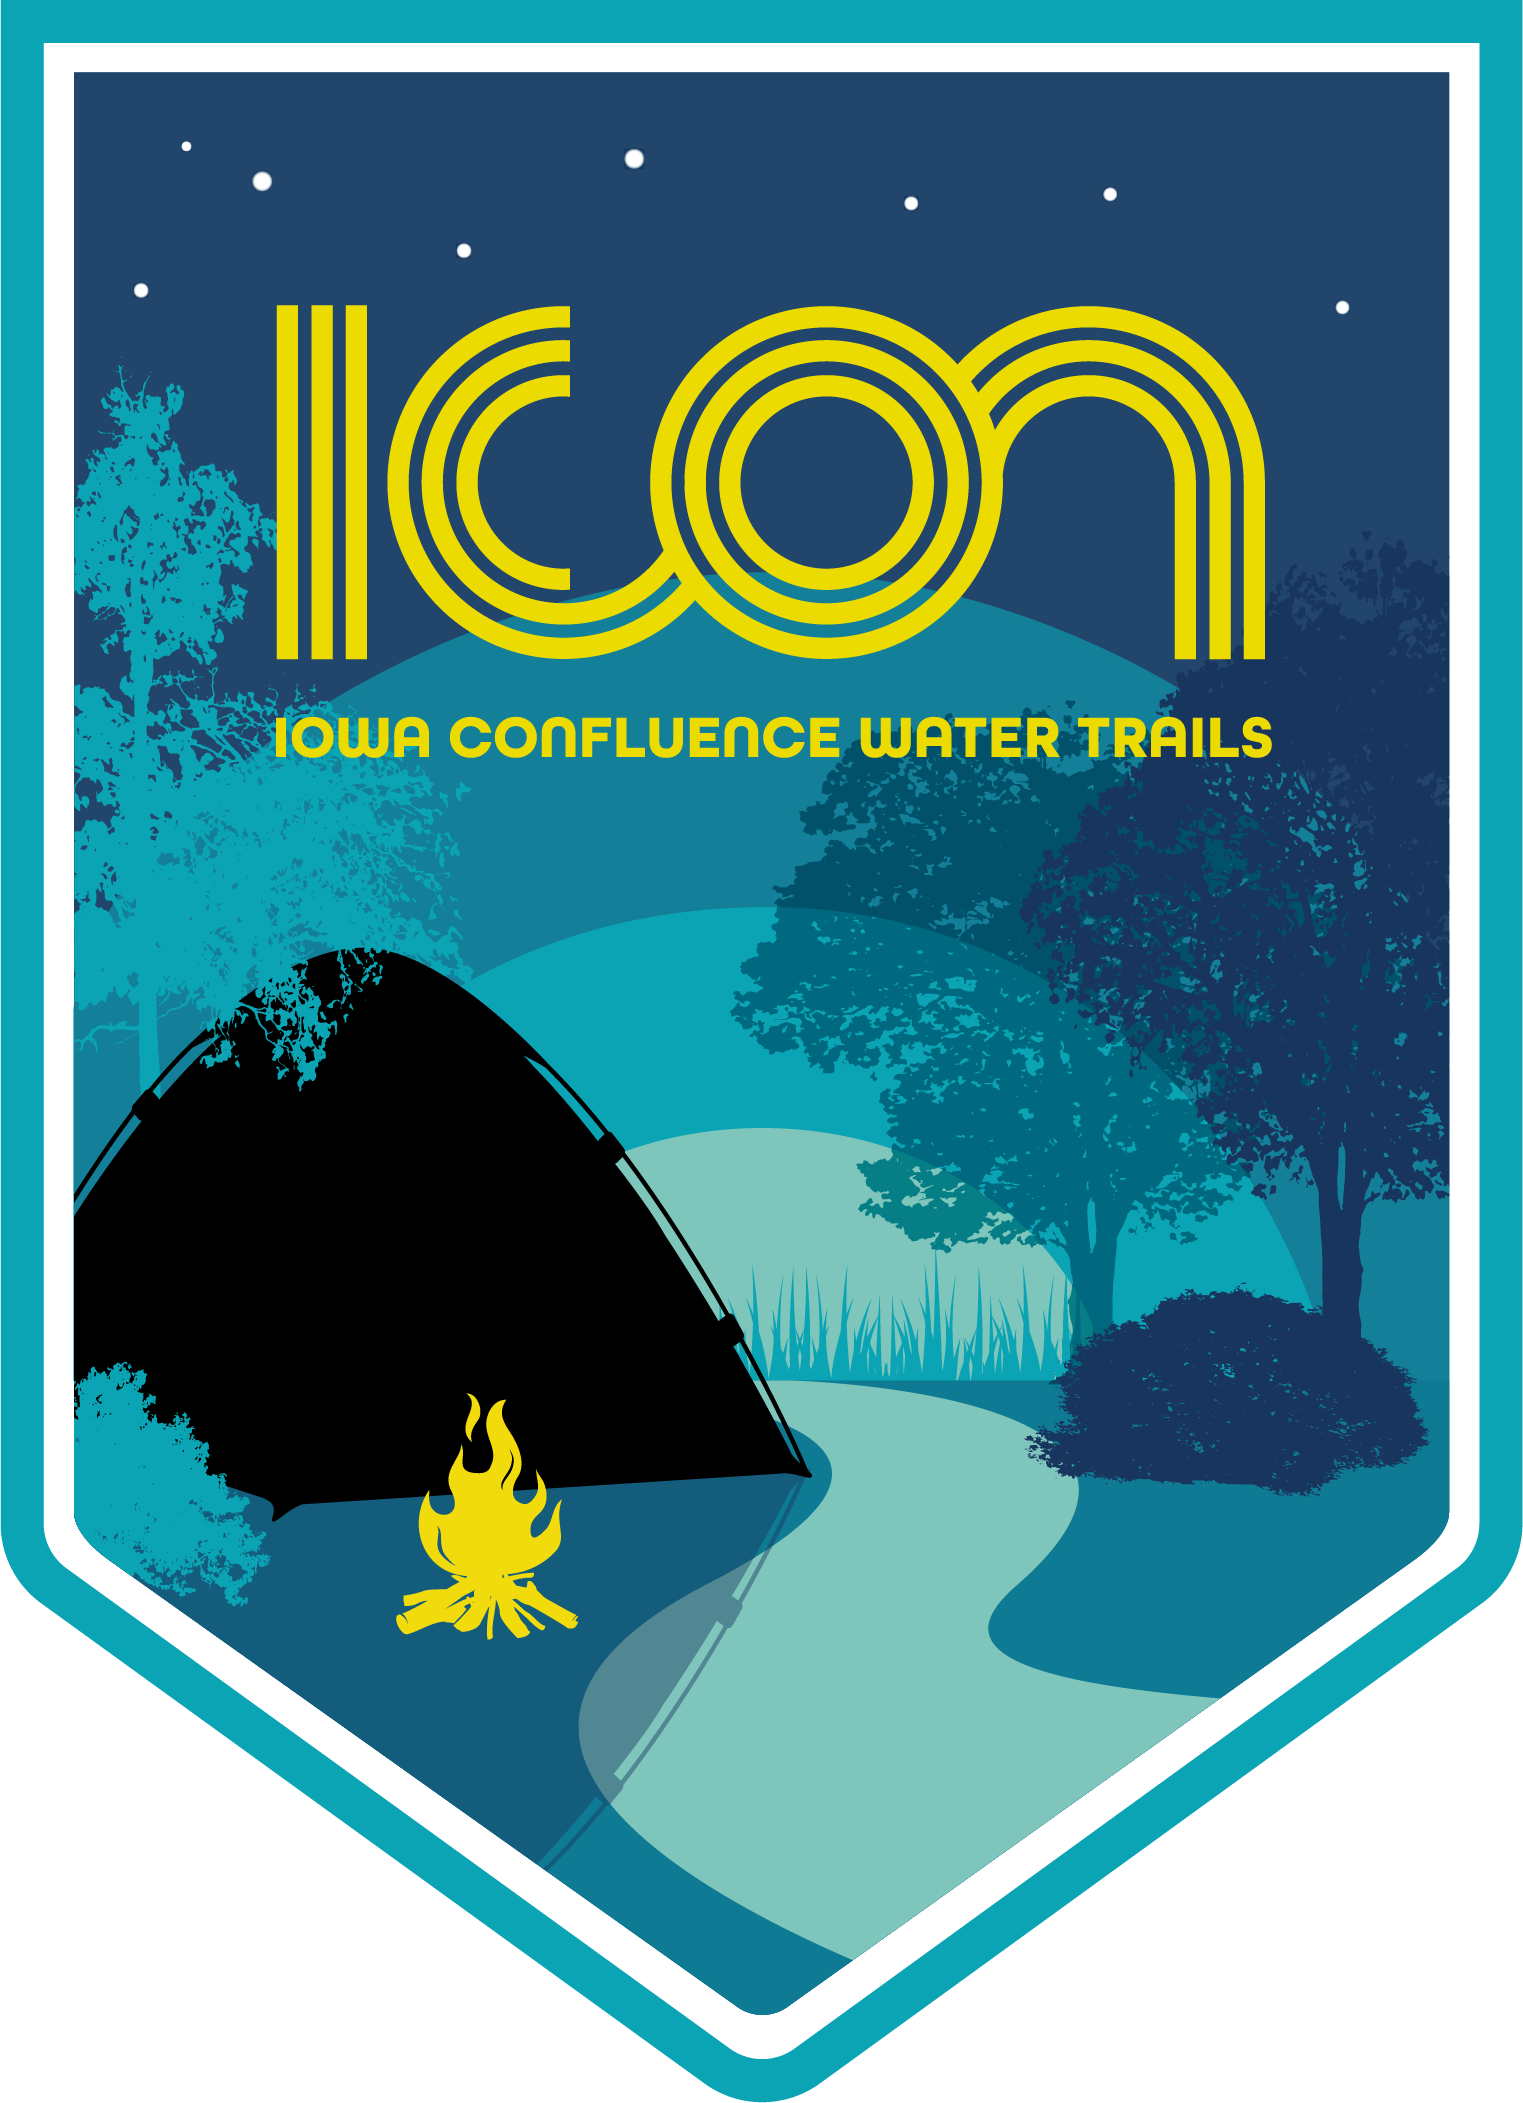 Iowa Confluence Water Trails Camping Badge